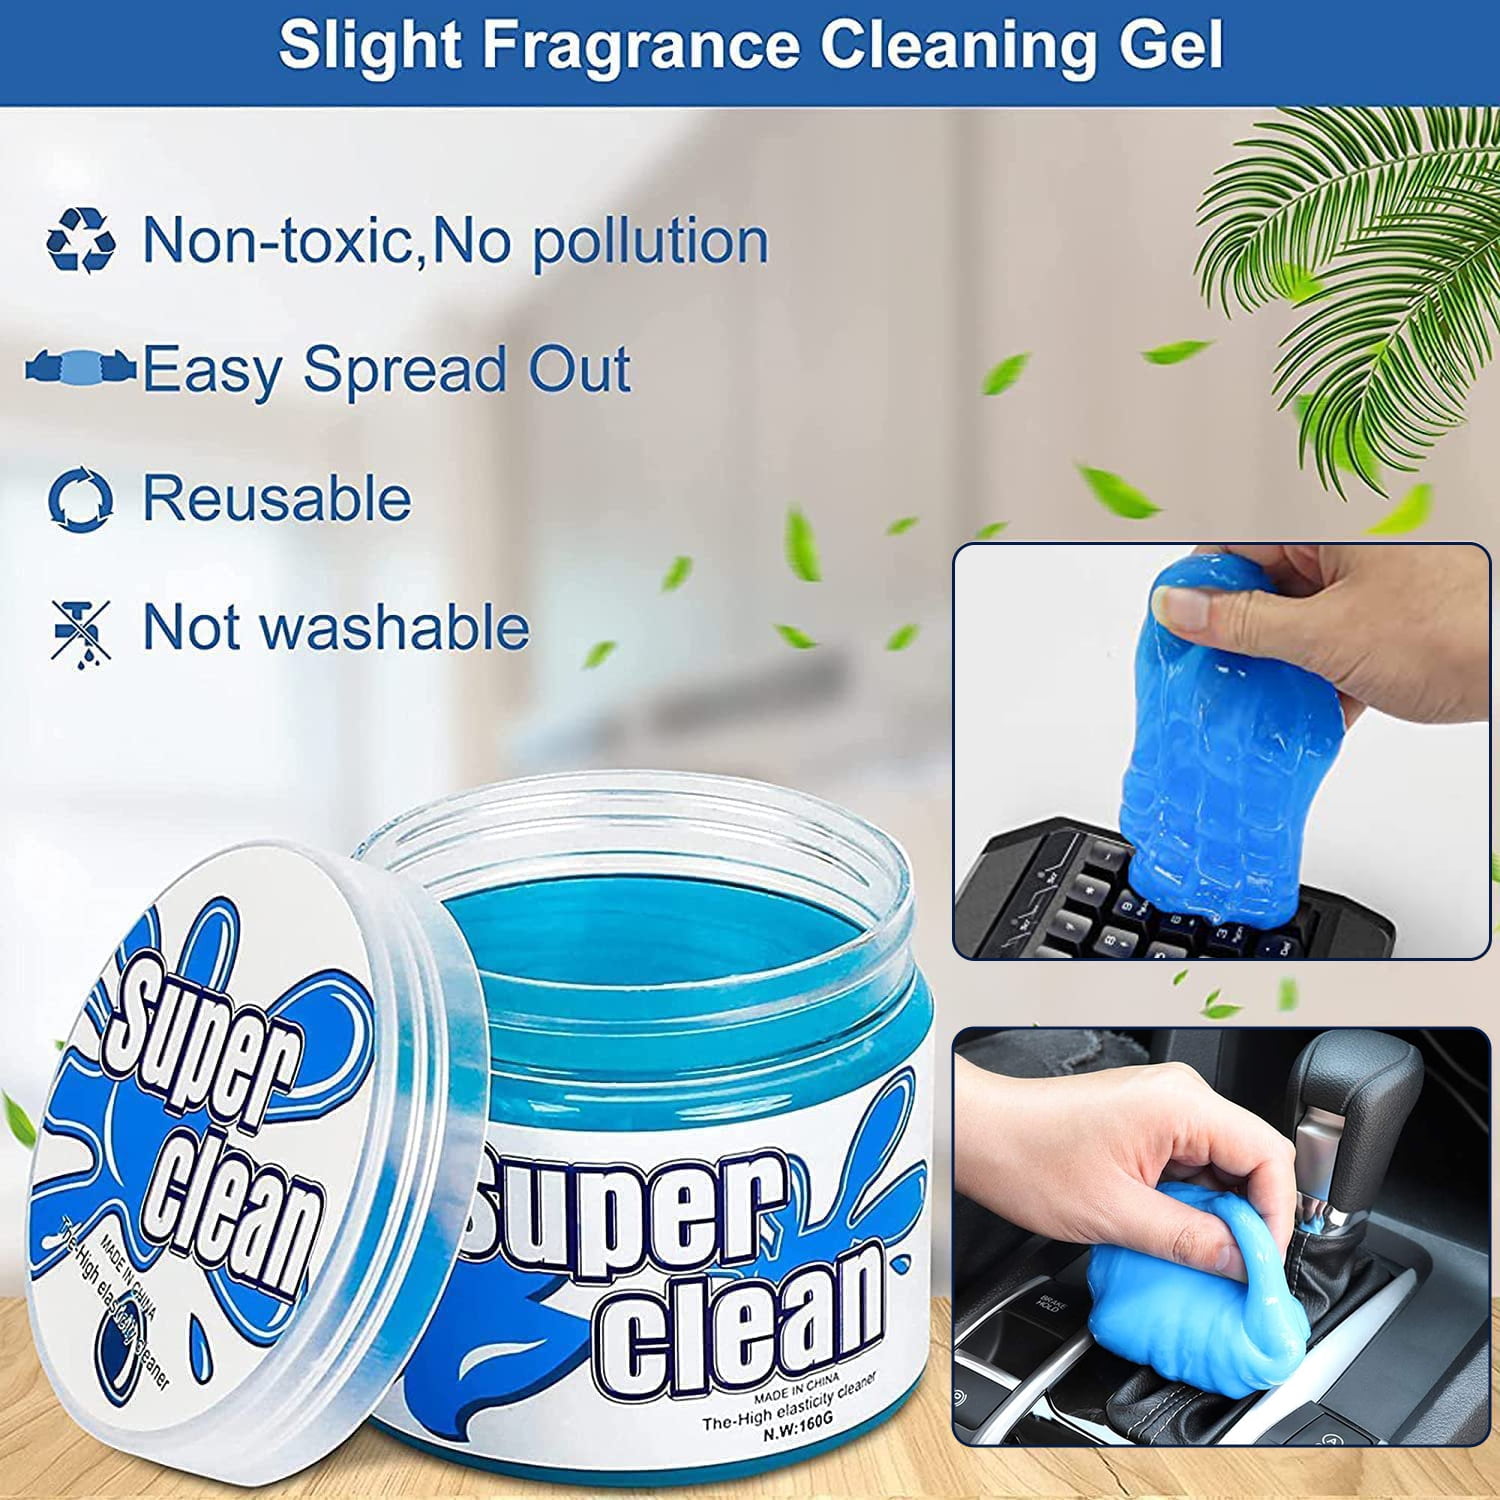 Houyhm Car Cleaning Gel, Universal Dust Cleaning Gel for Electronic Devices  Keyboard, Cleaner Gel for Car Interiors/Crevice and Home Office Items